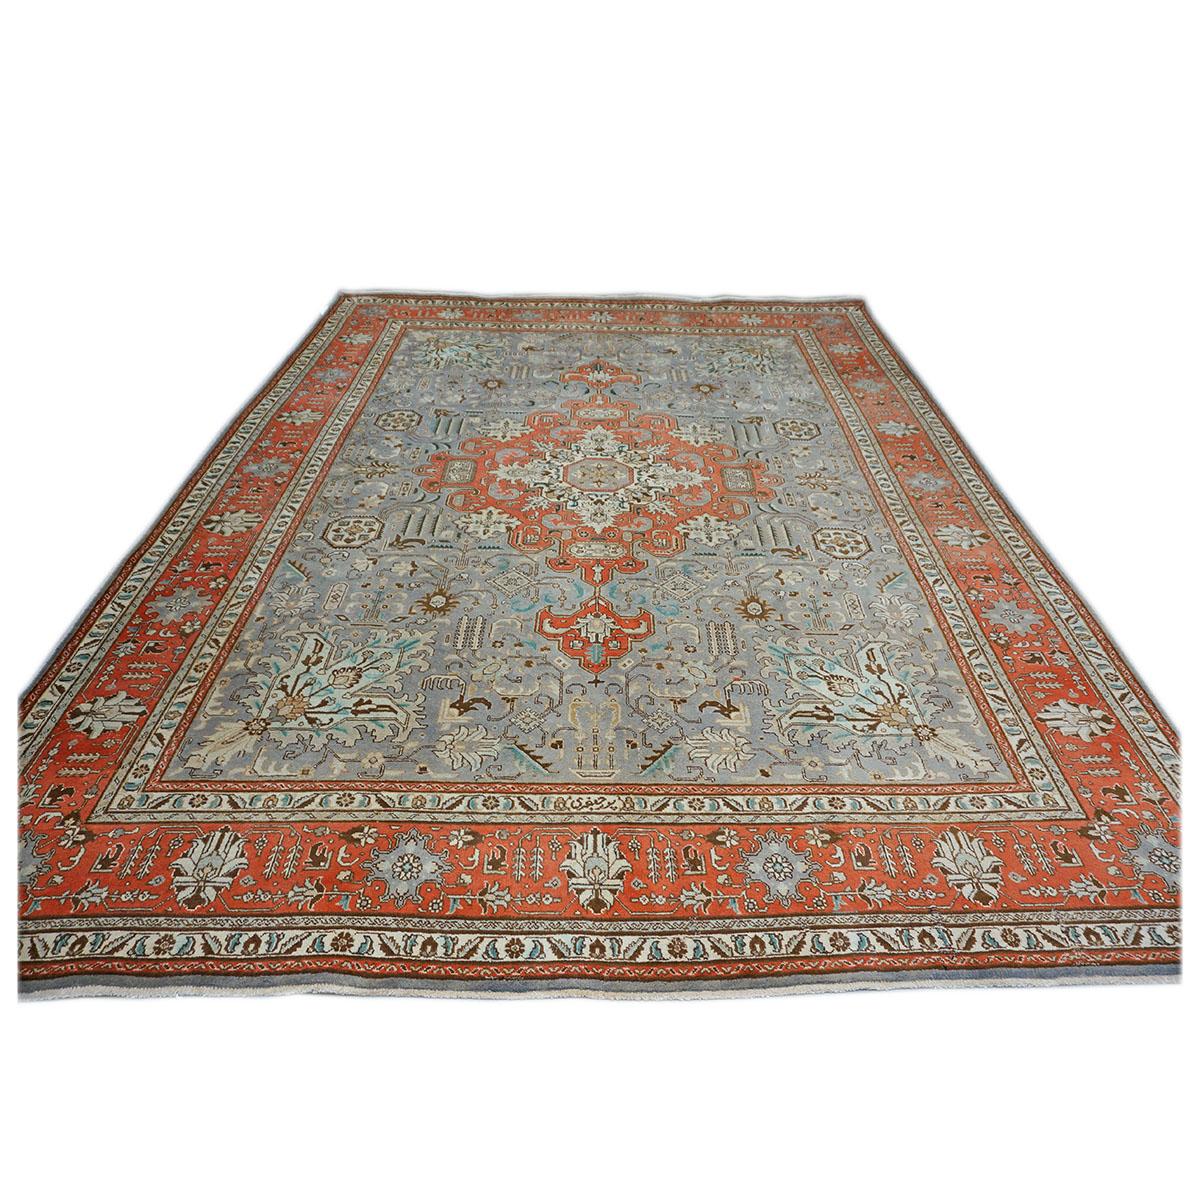 Ashly Fine Rugs presents a 1940s Antique Persian Tabriz 10x13 Wool Handmade Rug. Tabriz is a northern city in modern-day Iran and has forever been famous for the fineness and craftsmanship of its handmade rugs. These rugs are better known as the